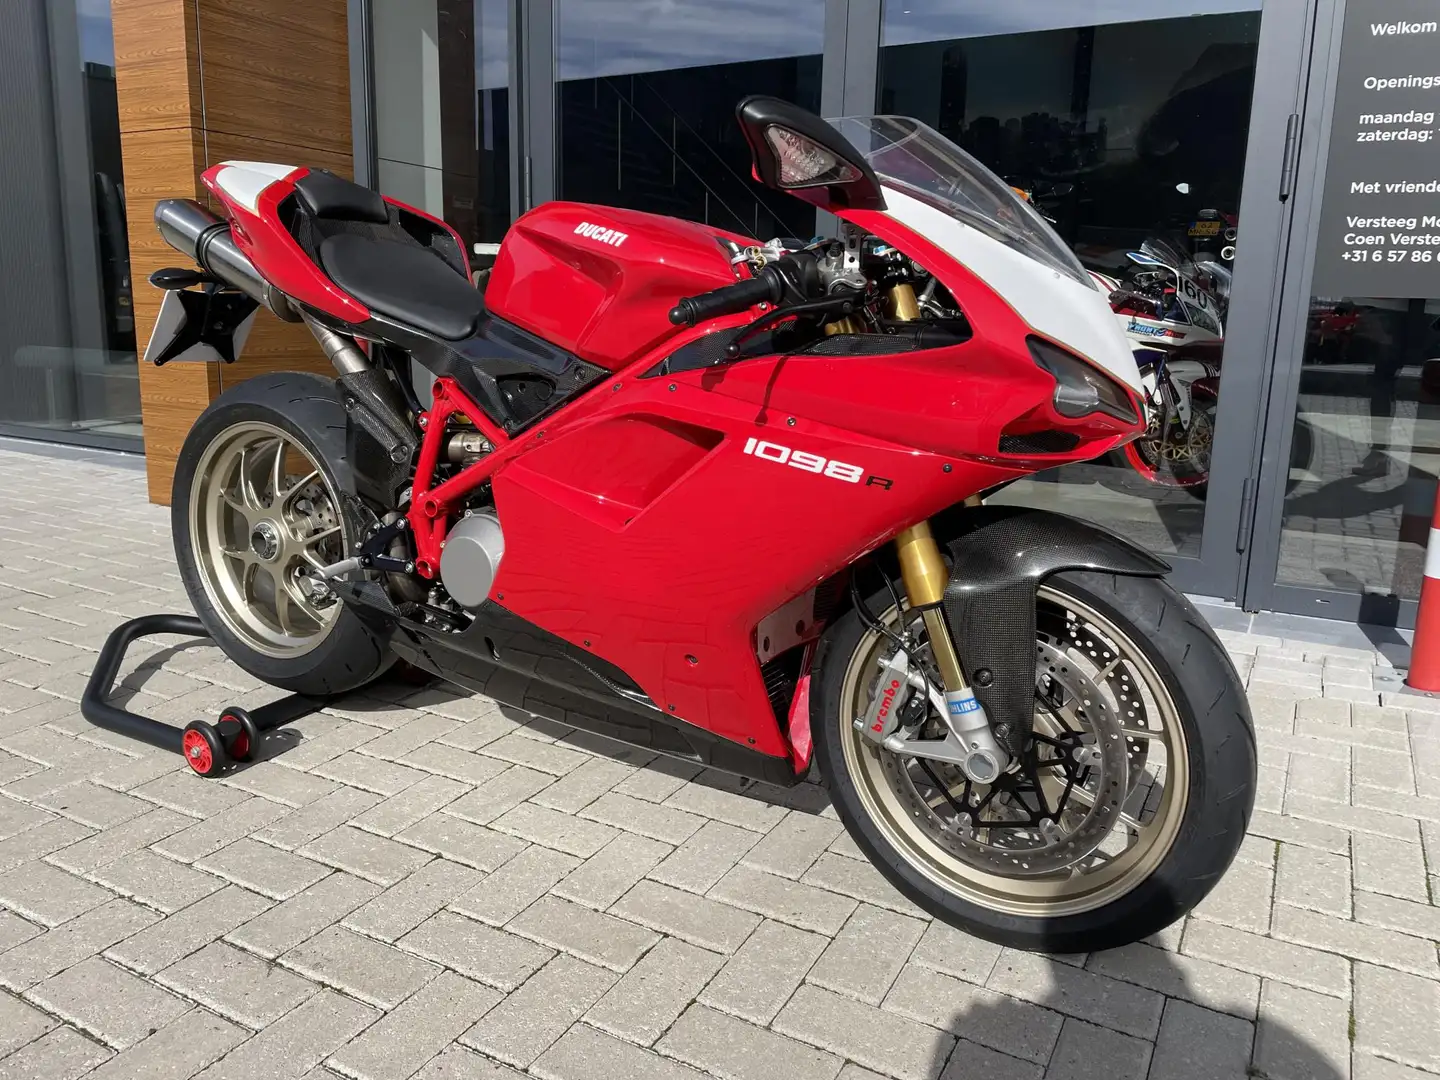 Ducati 1098 R # 1098R # one of a kind Rot - 2